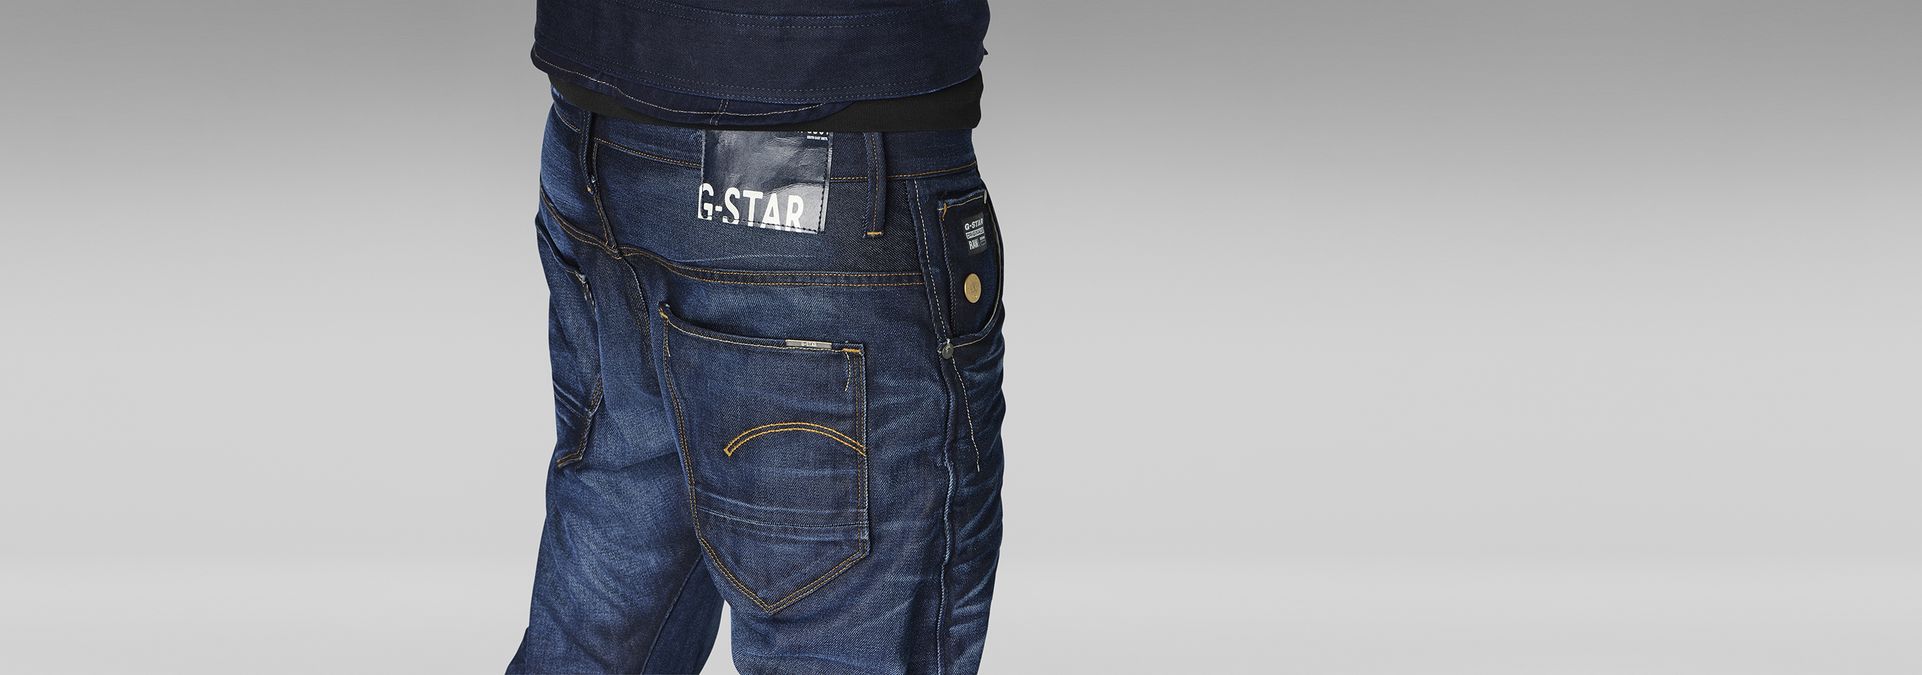 g-star low tapered 3301